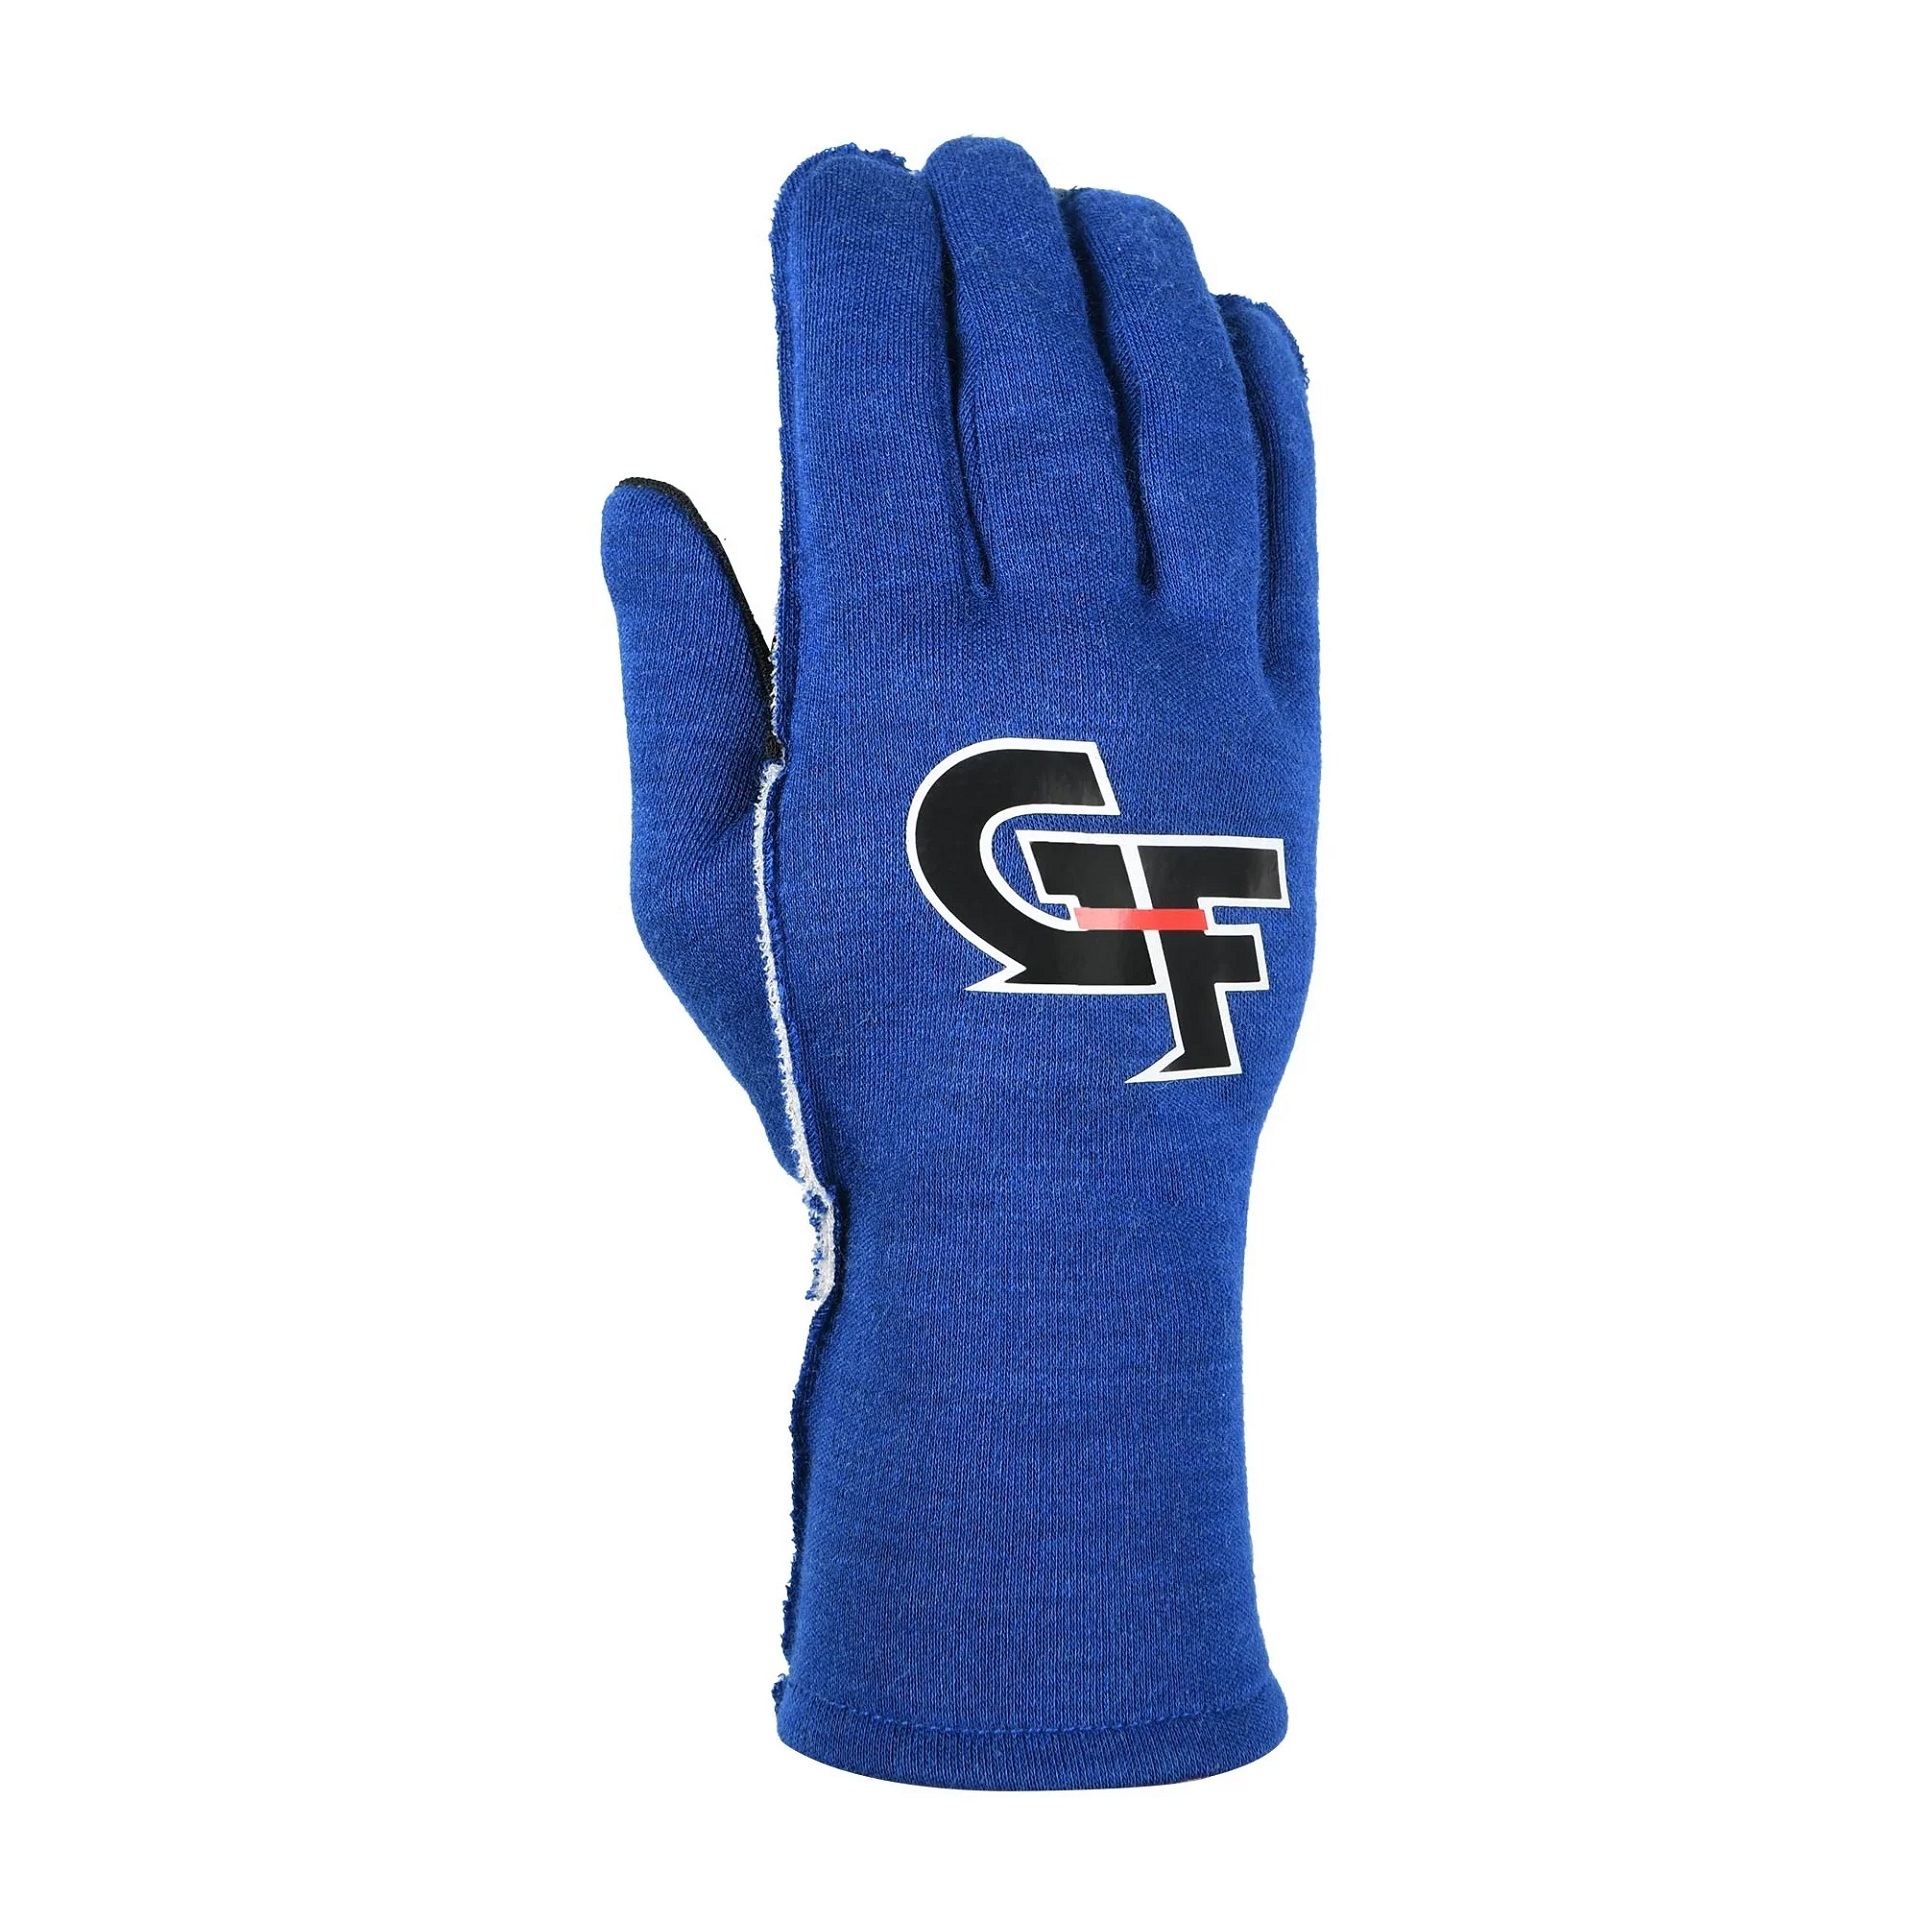 G-FORCE Gloves G-Limit Small Blue